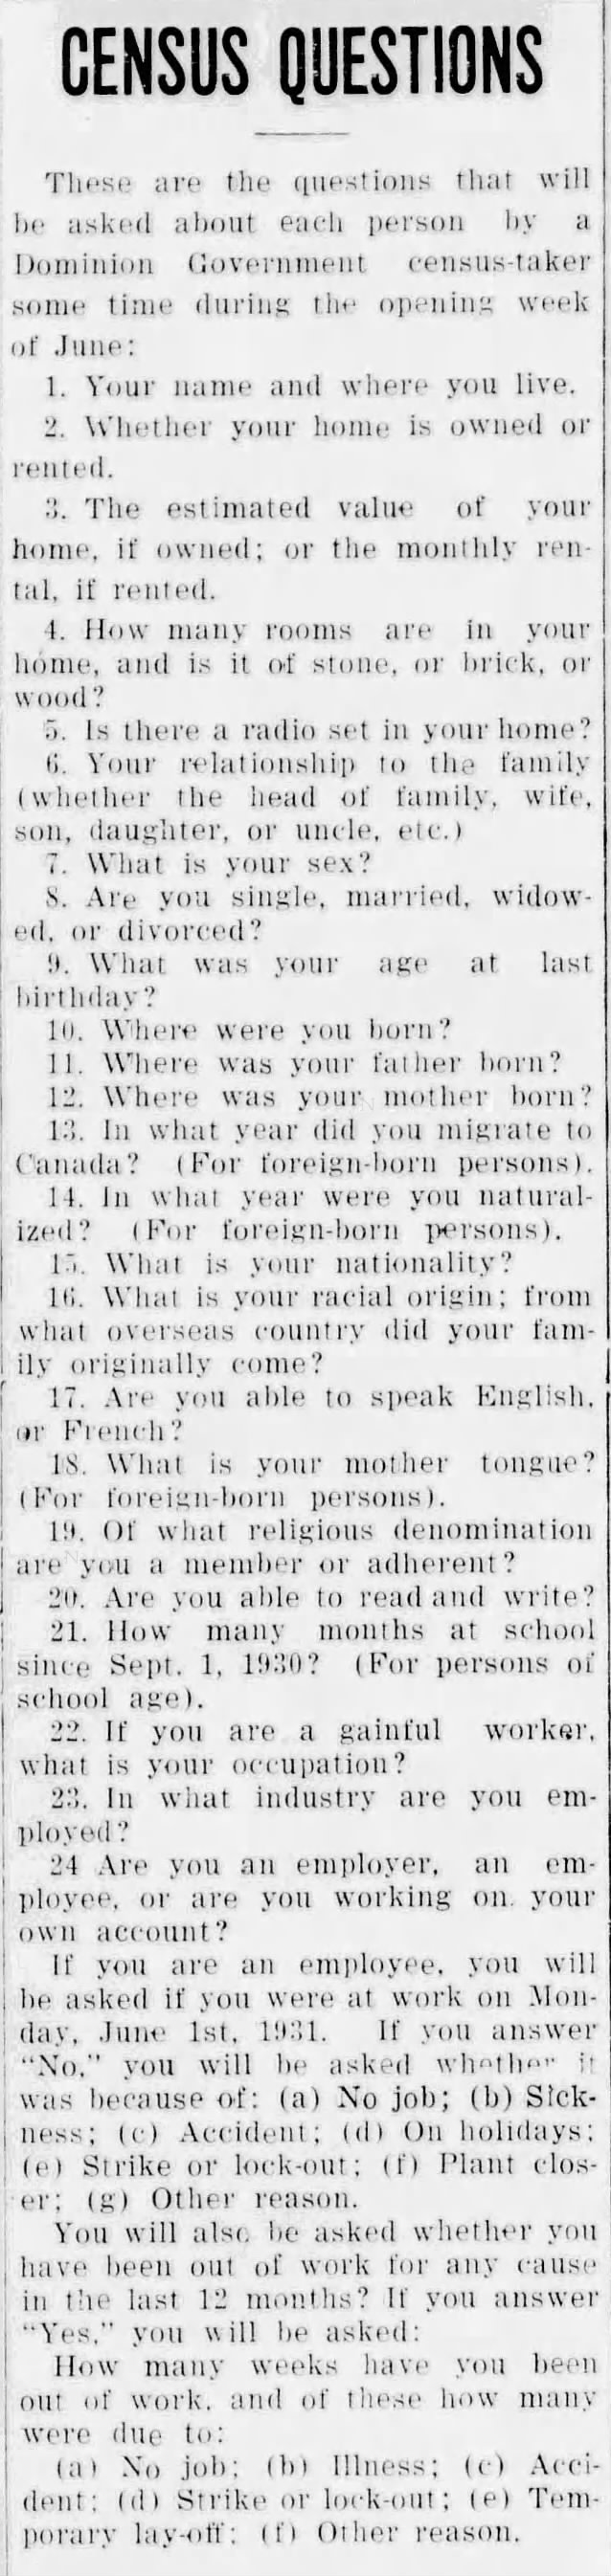 1931 Census of Canada Questions 